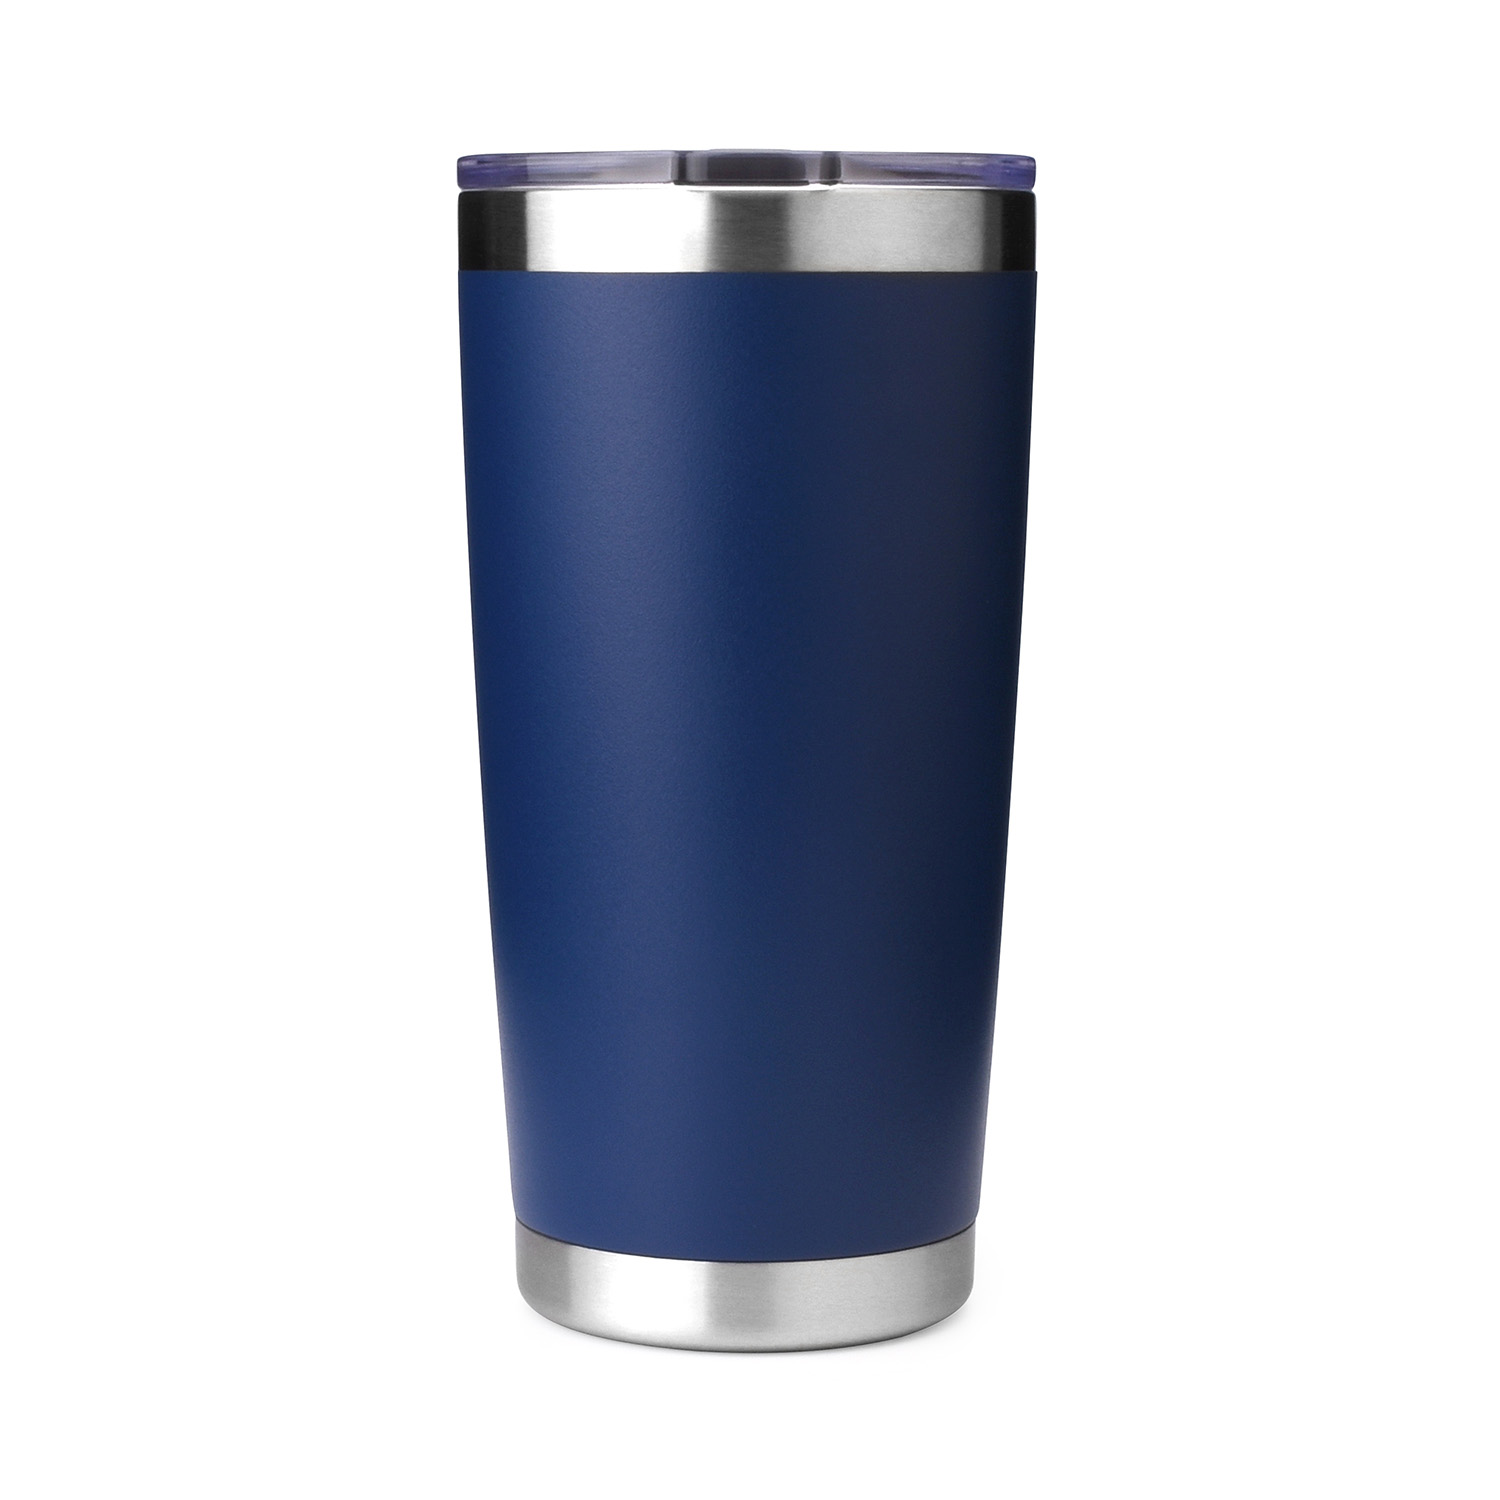 https://www.waterbottle.tech/wp-content/uploads/2019/01/Vacuum-Insulated-Stainless-Steel-Tumbler-s2420f1.jpg